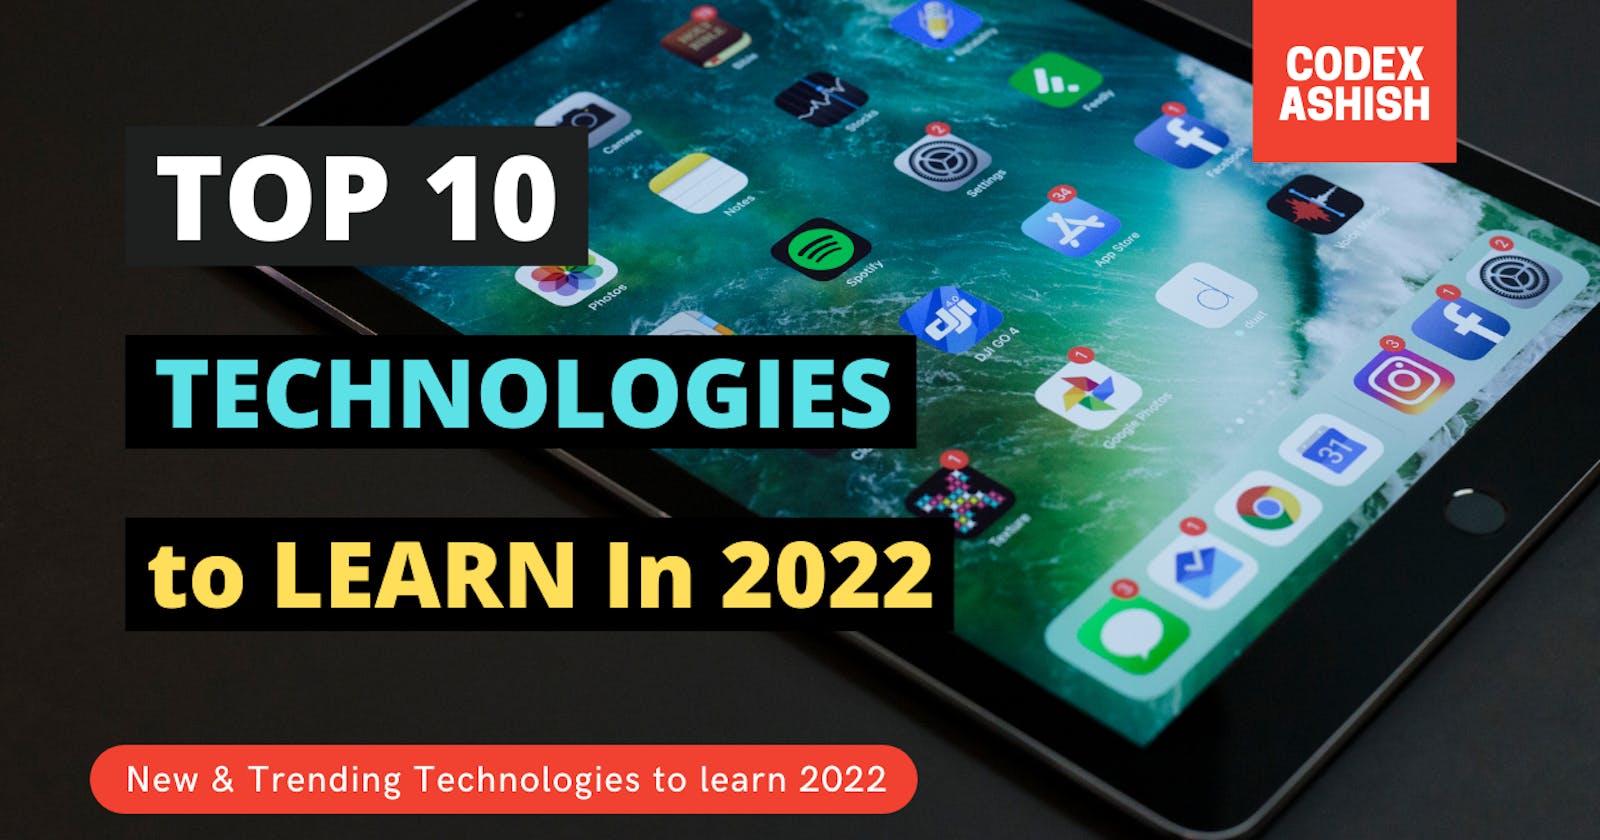 Top 10 Trending Technologies to Learn in 2022